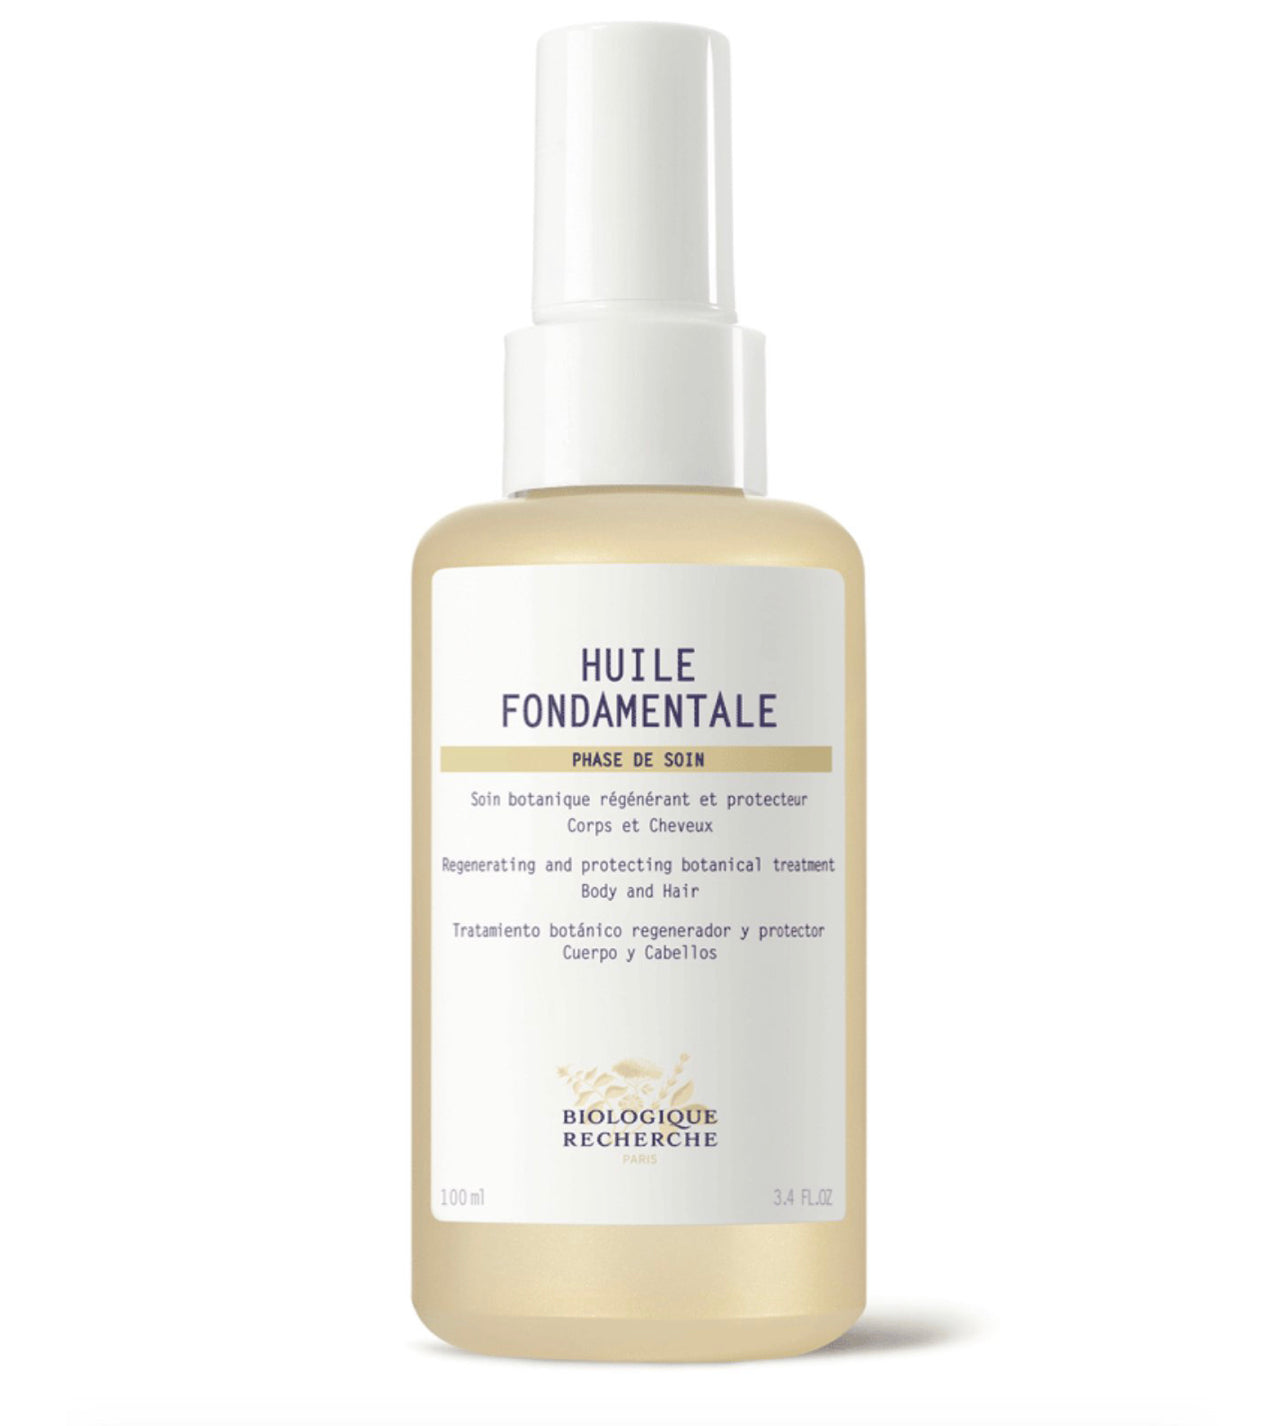 HUILE FONDAMENTALE - Regenerating and protecting botanical treatment Body and Hair